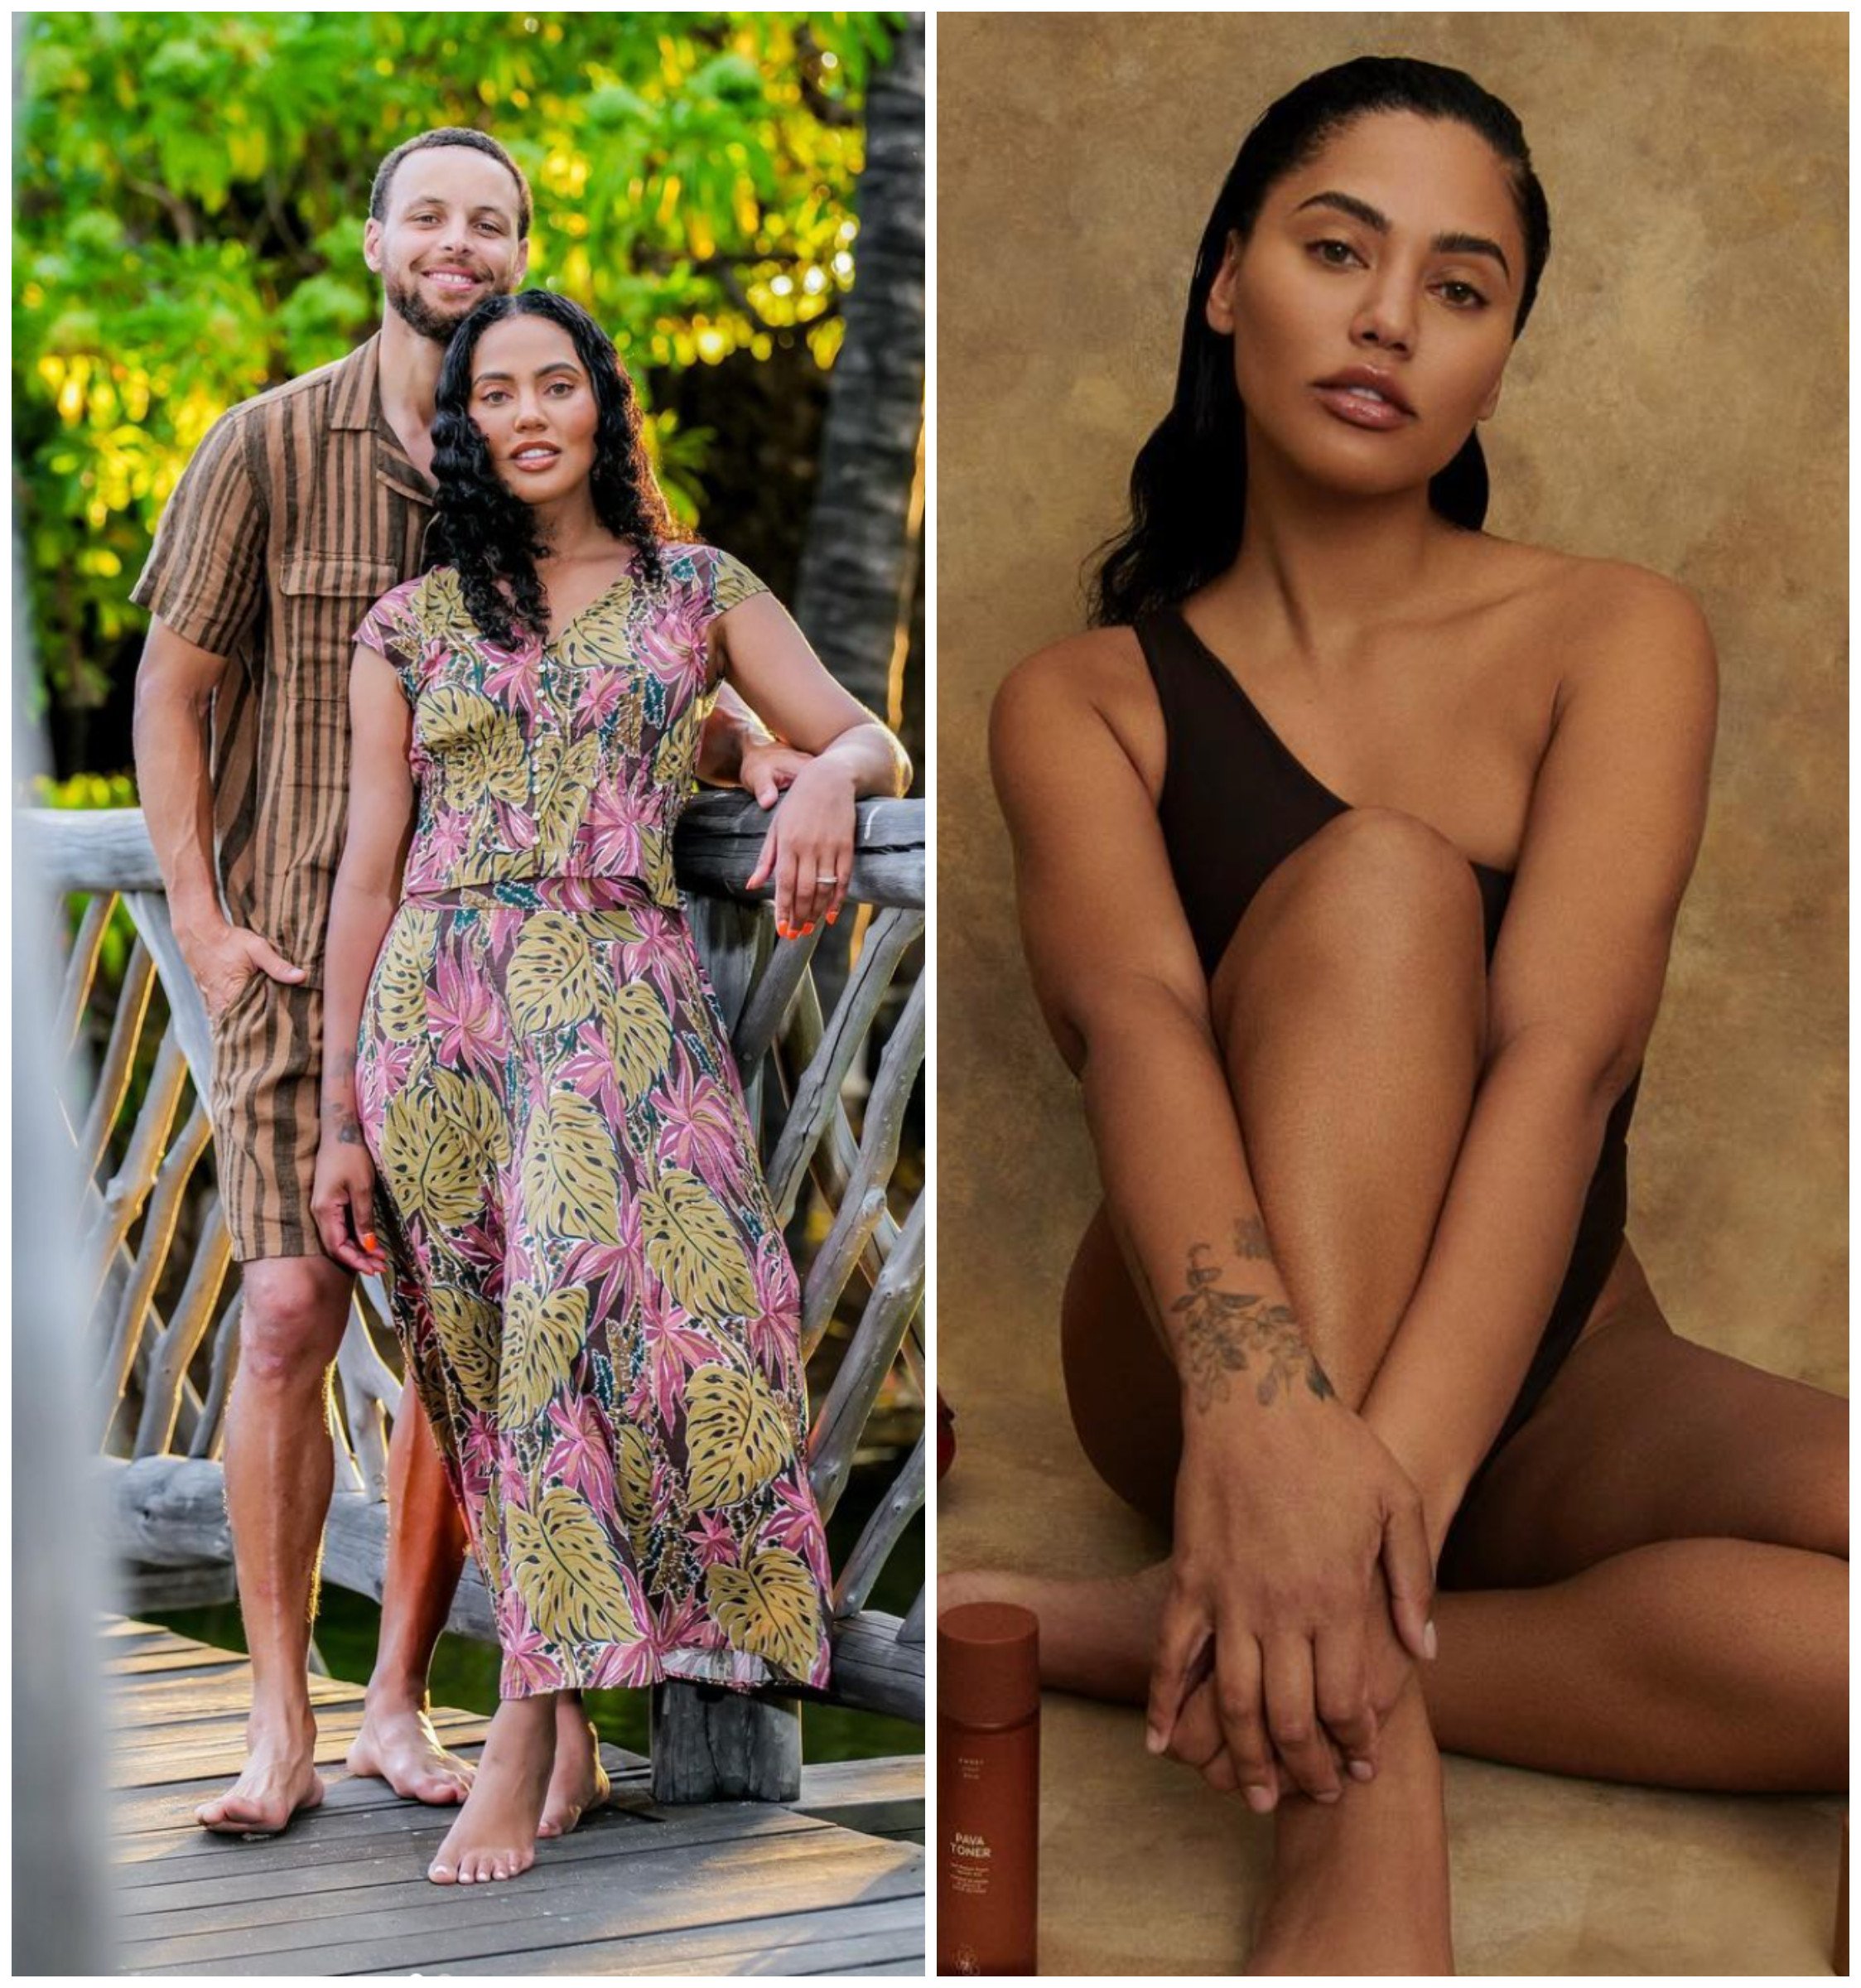 Meet NBA star Steph Curry’s multi-talented wife Ayesha, who just gave birth to the couple’s fourth child. Photos: @ayeshacurry/Instagram